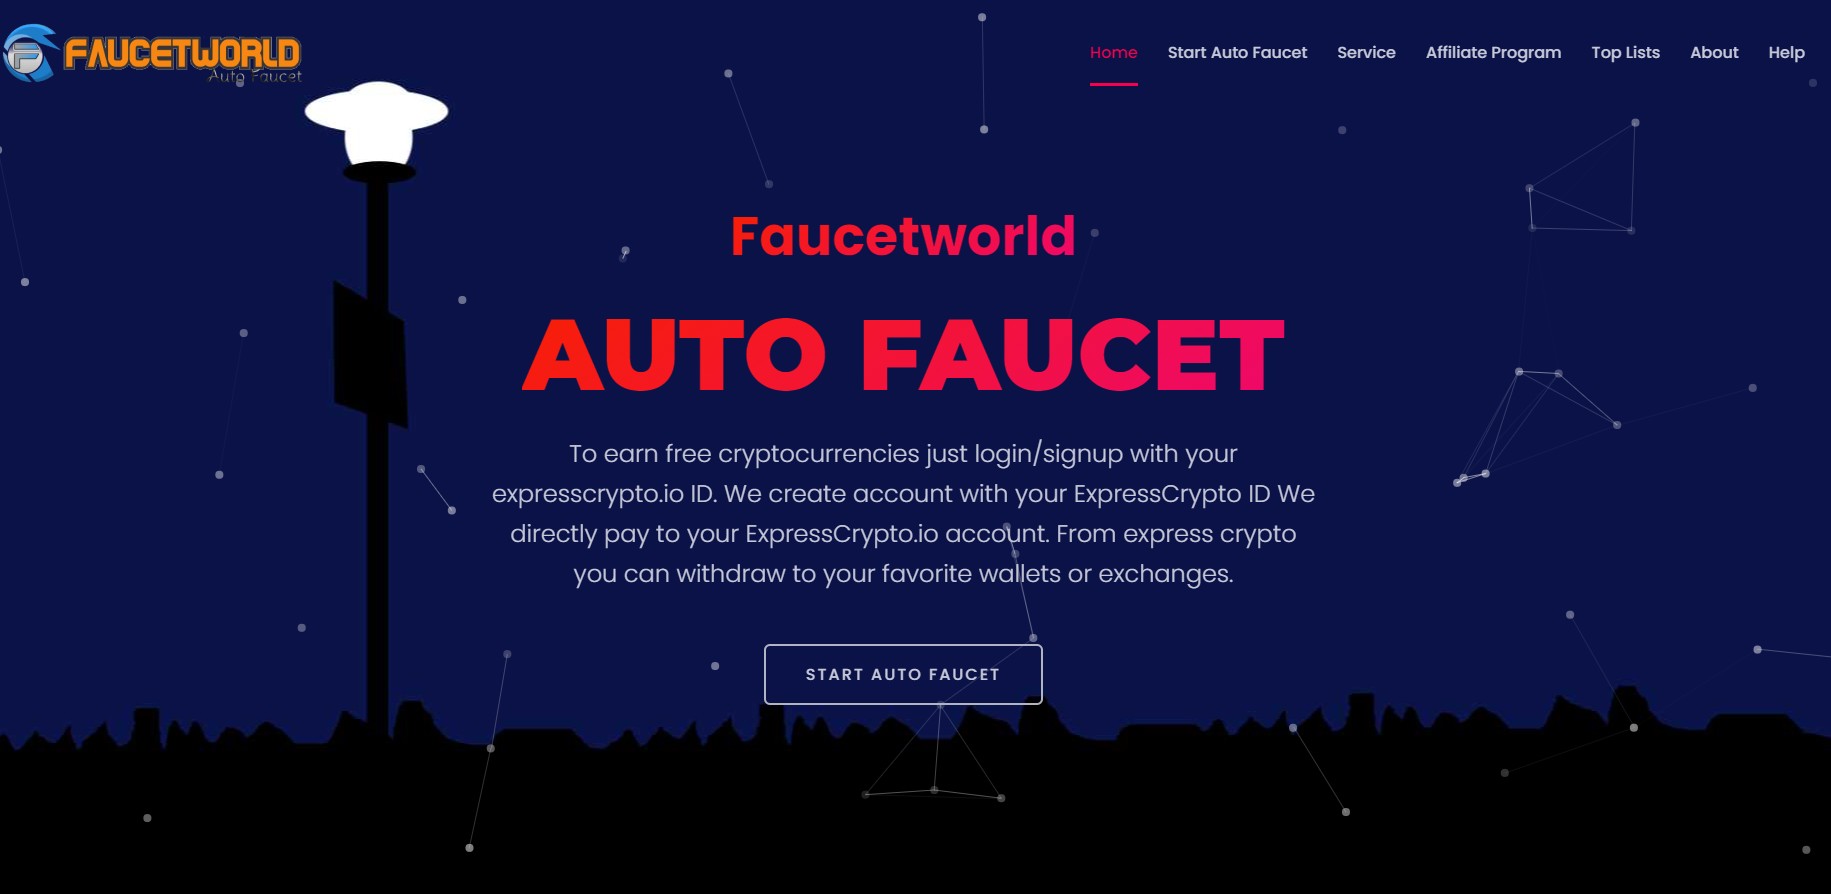 Free Cryptocurrencies With Faucet World